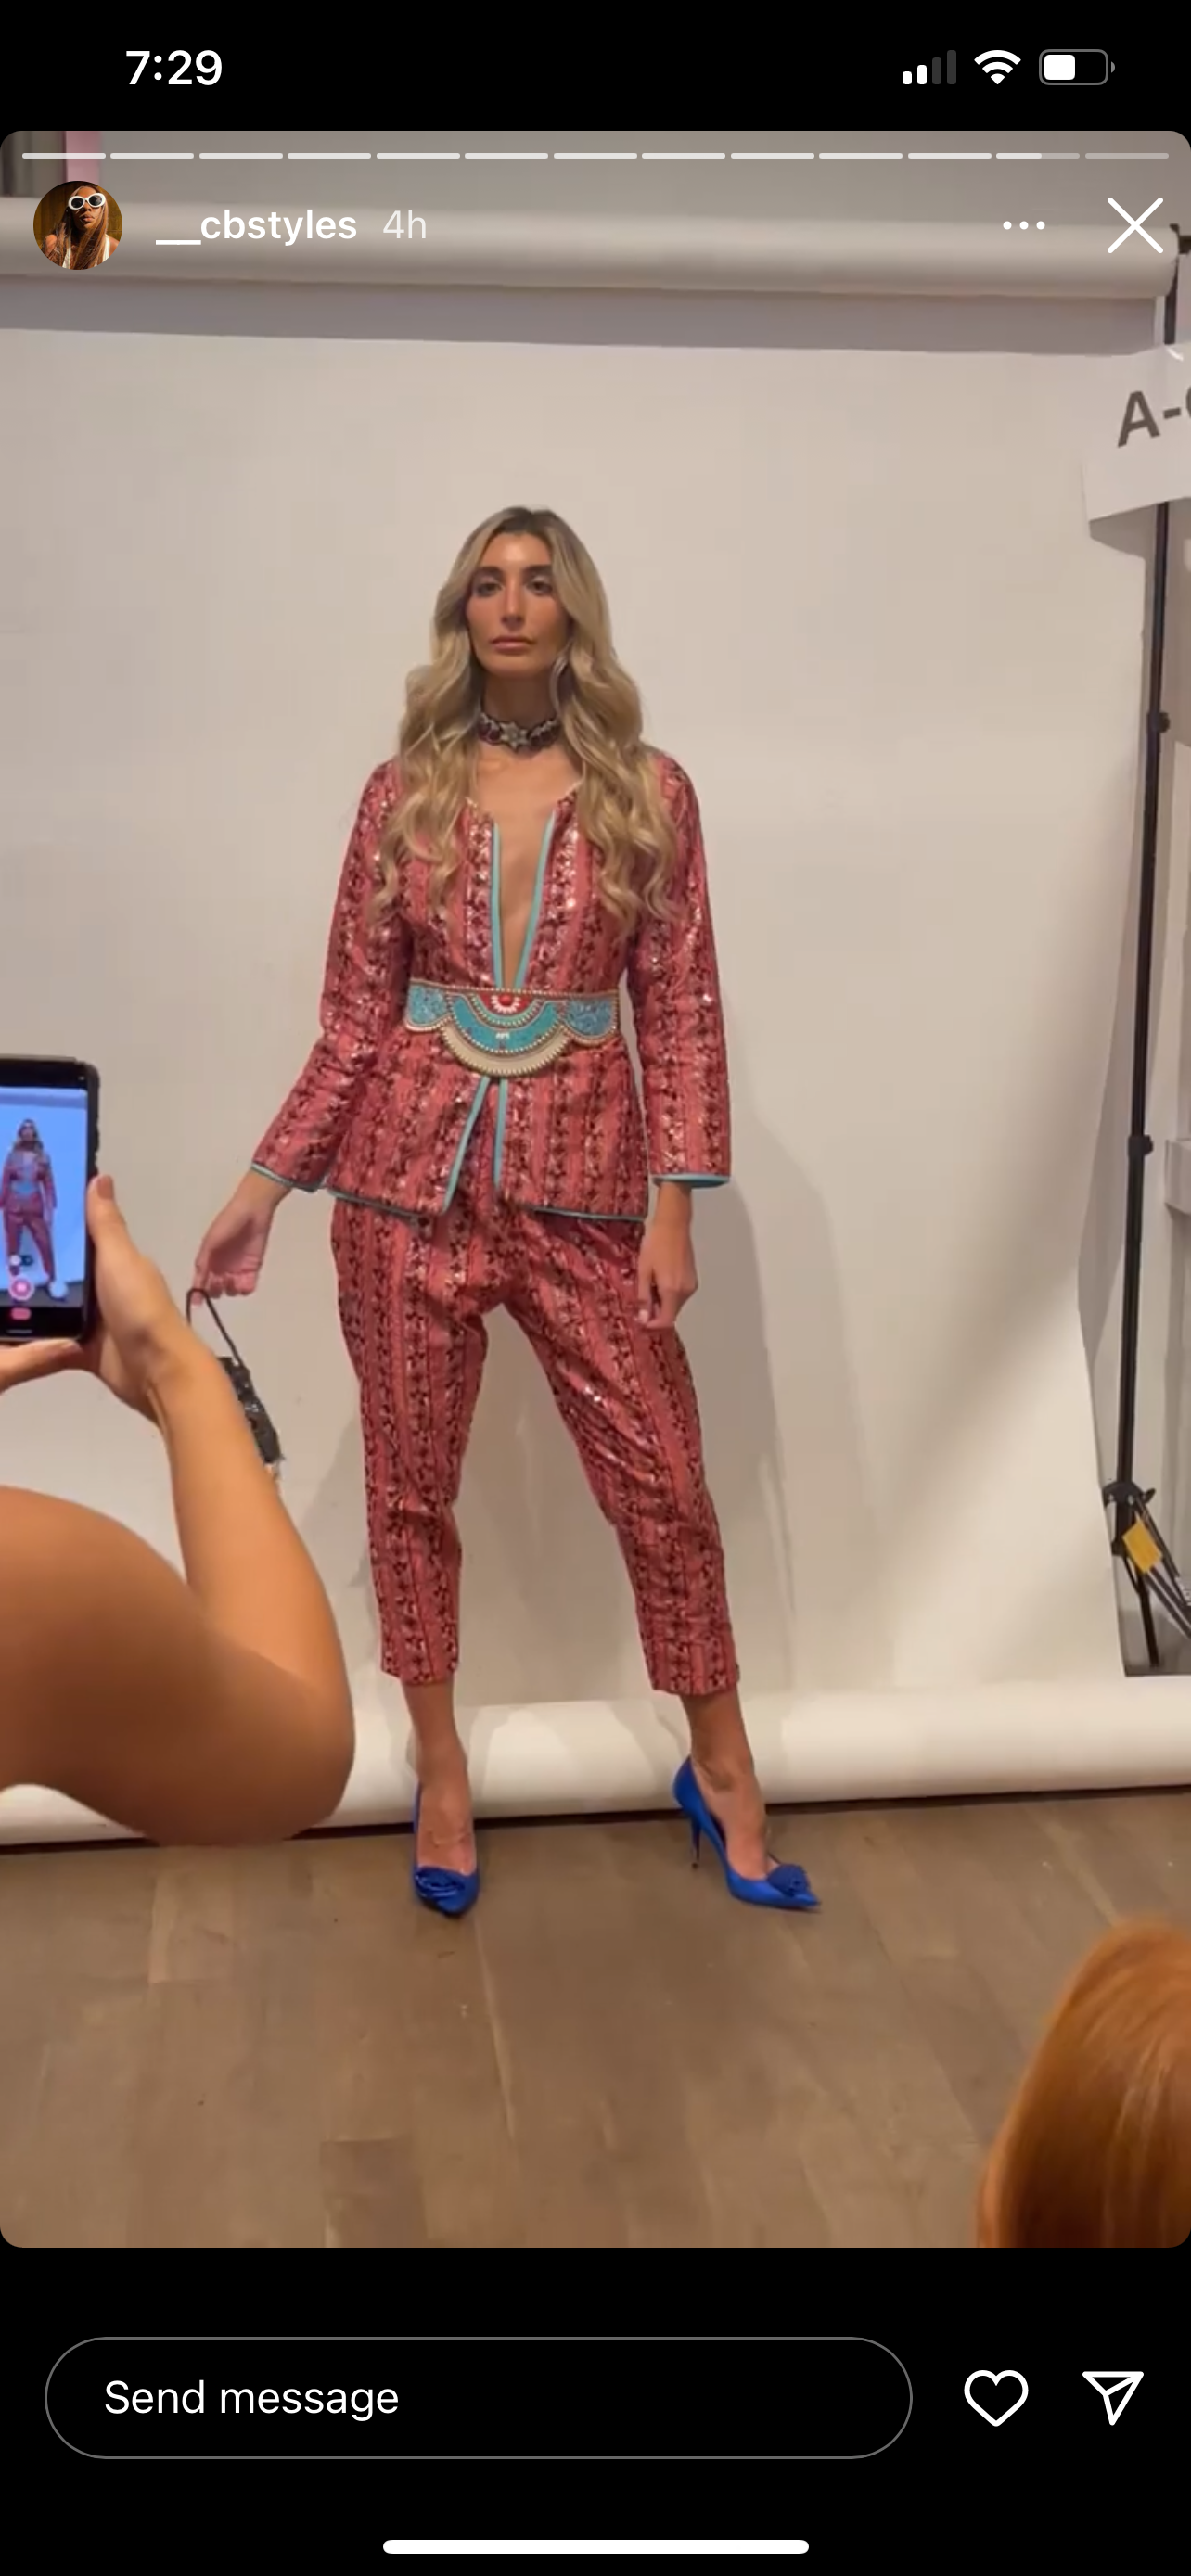 The NY pant suit